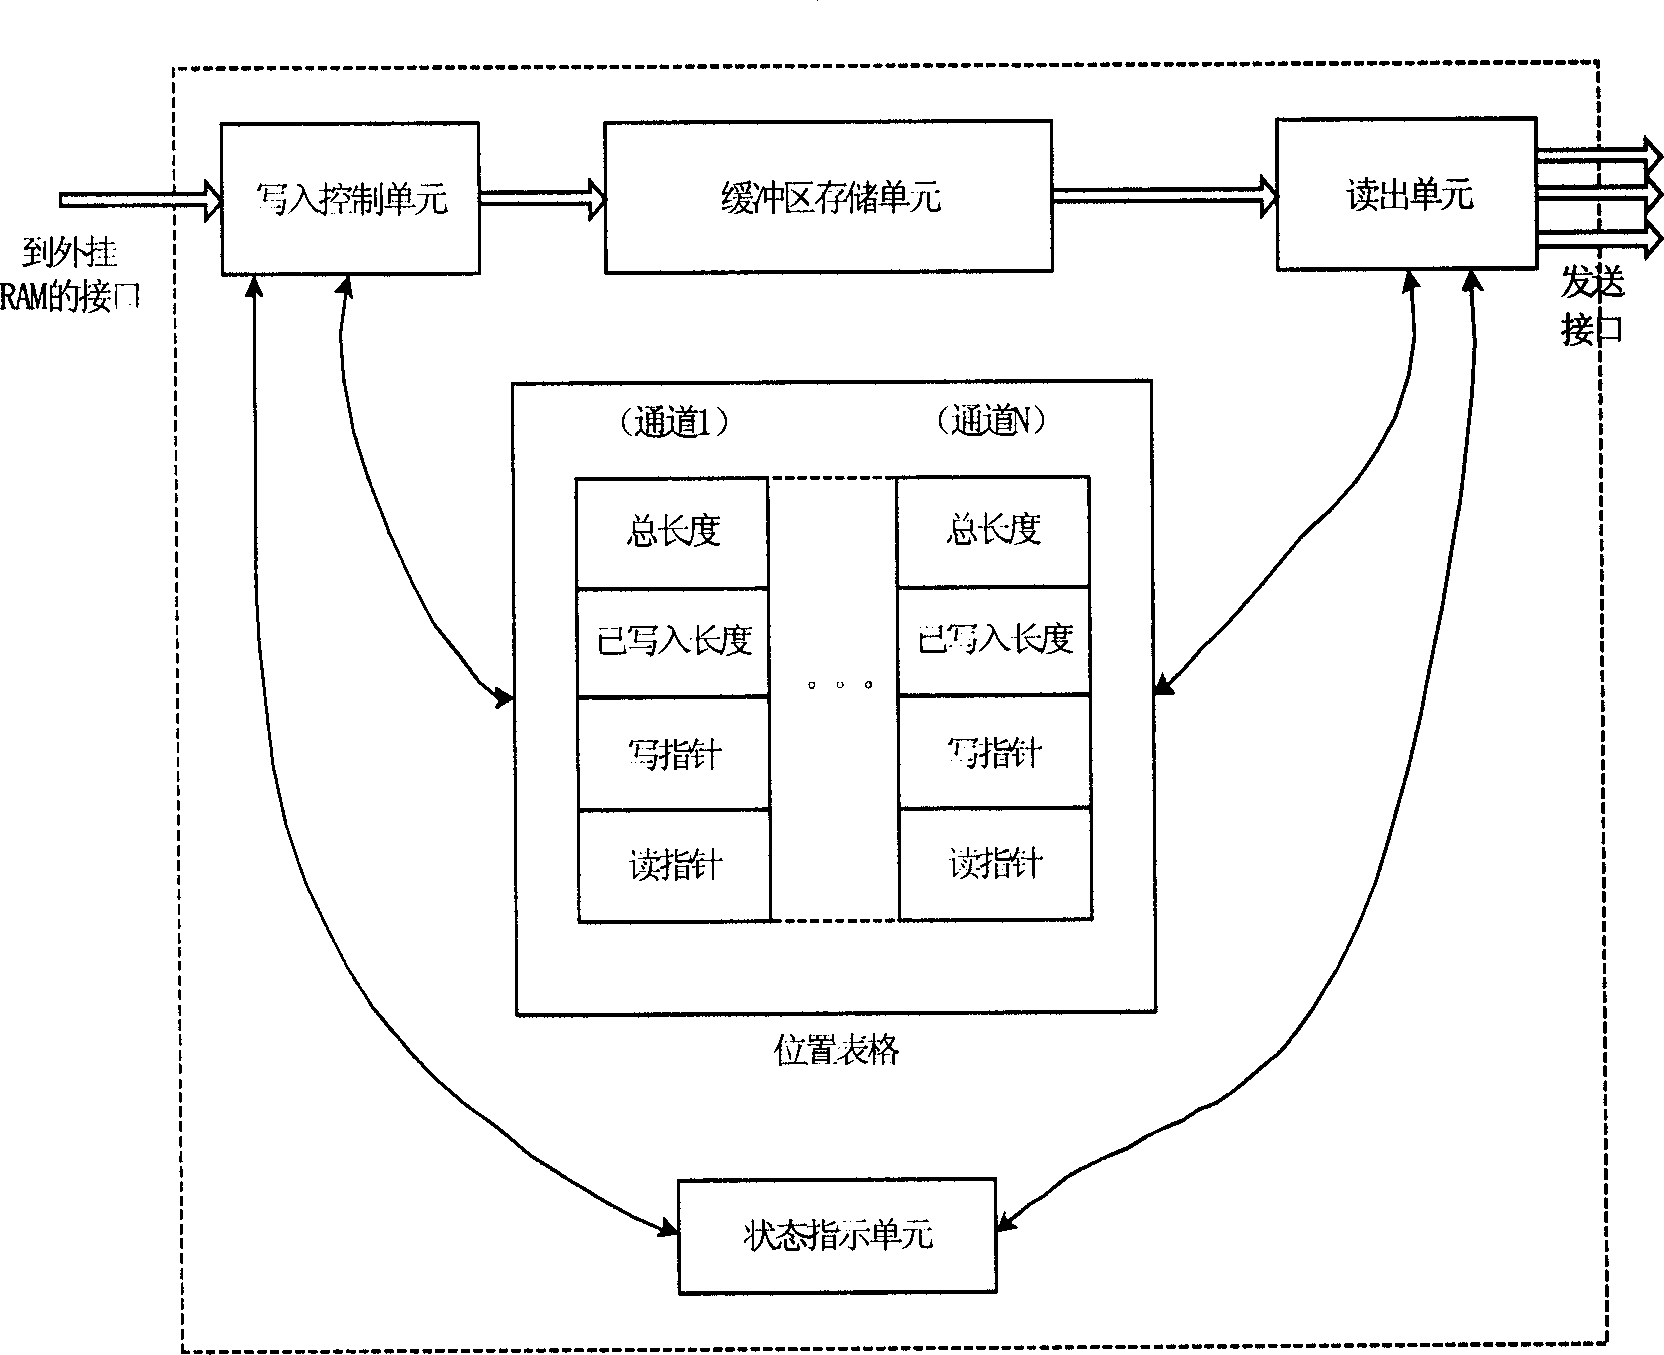 Method and device for managing transmitting buffer area in field programmable gate array